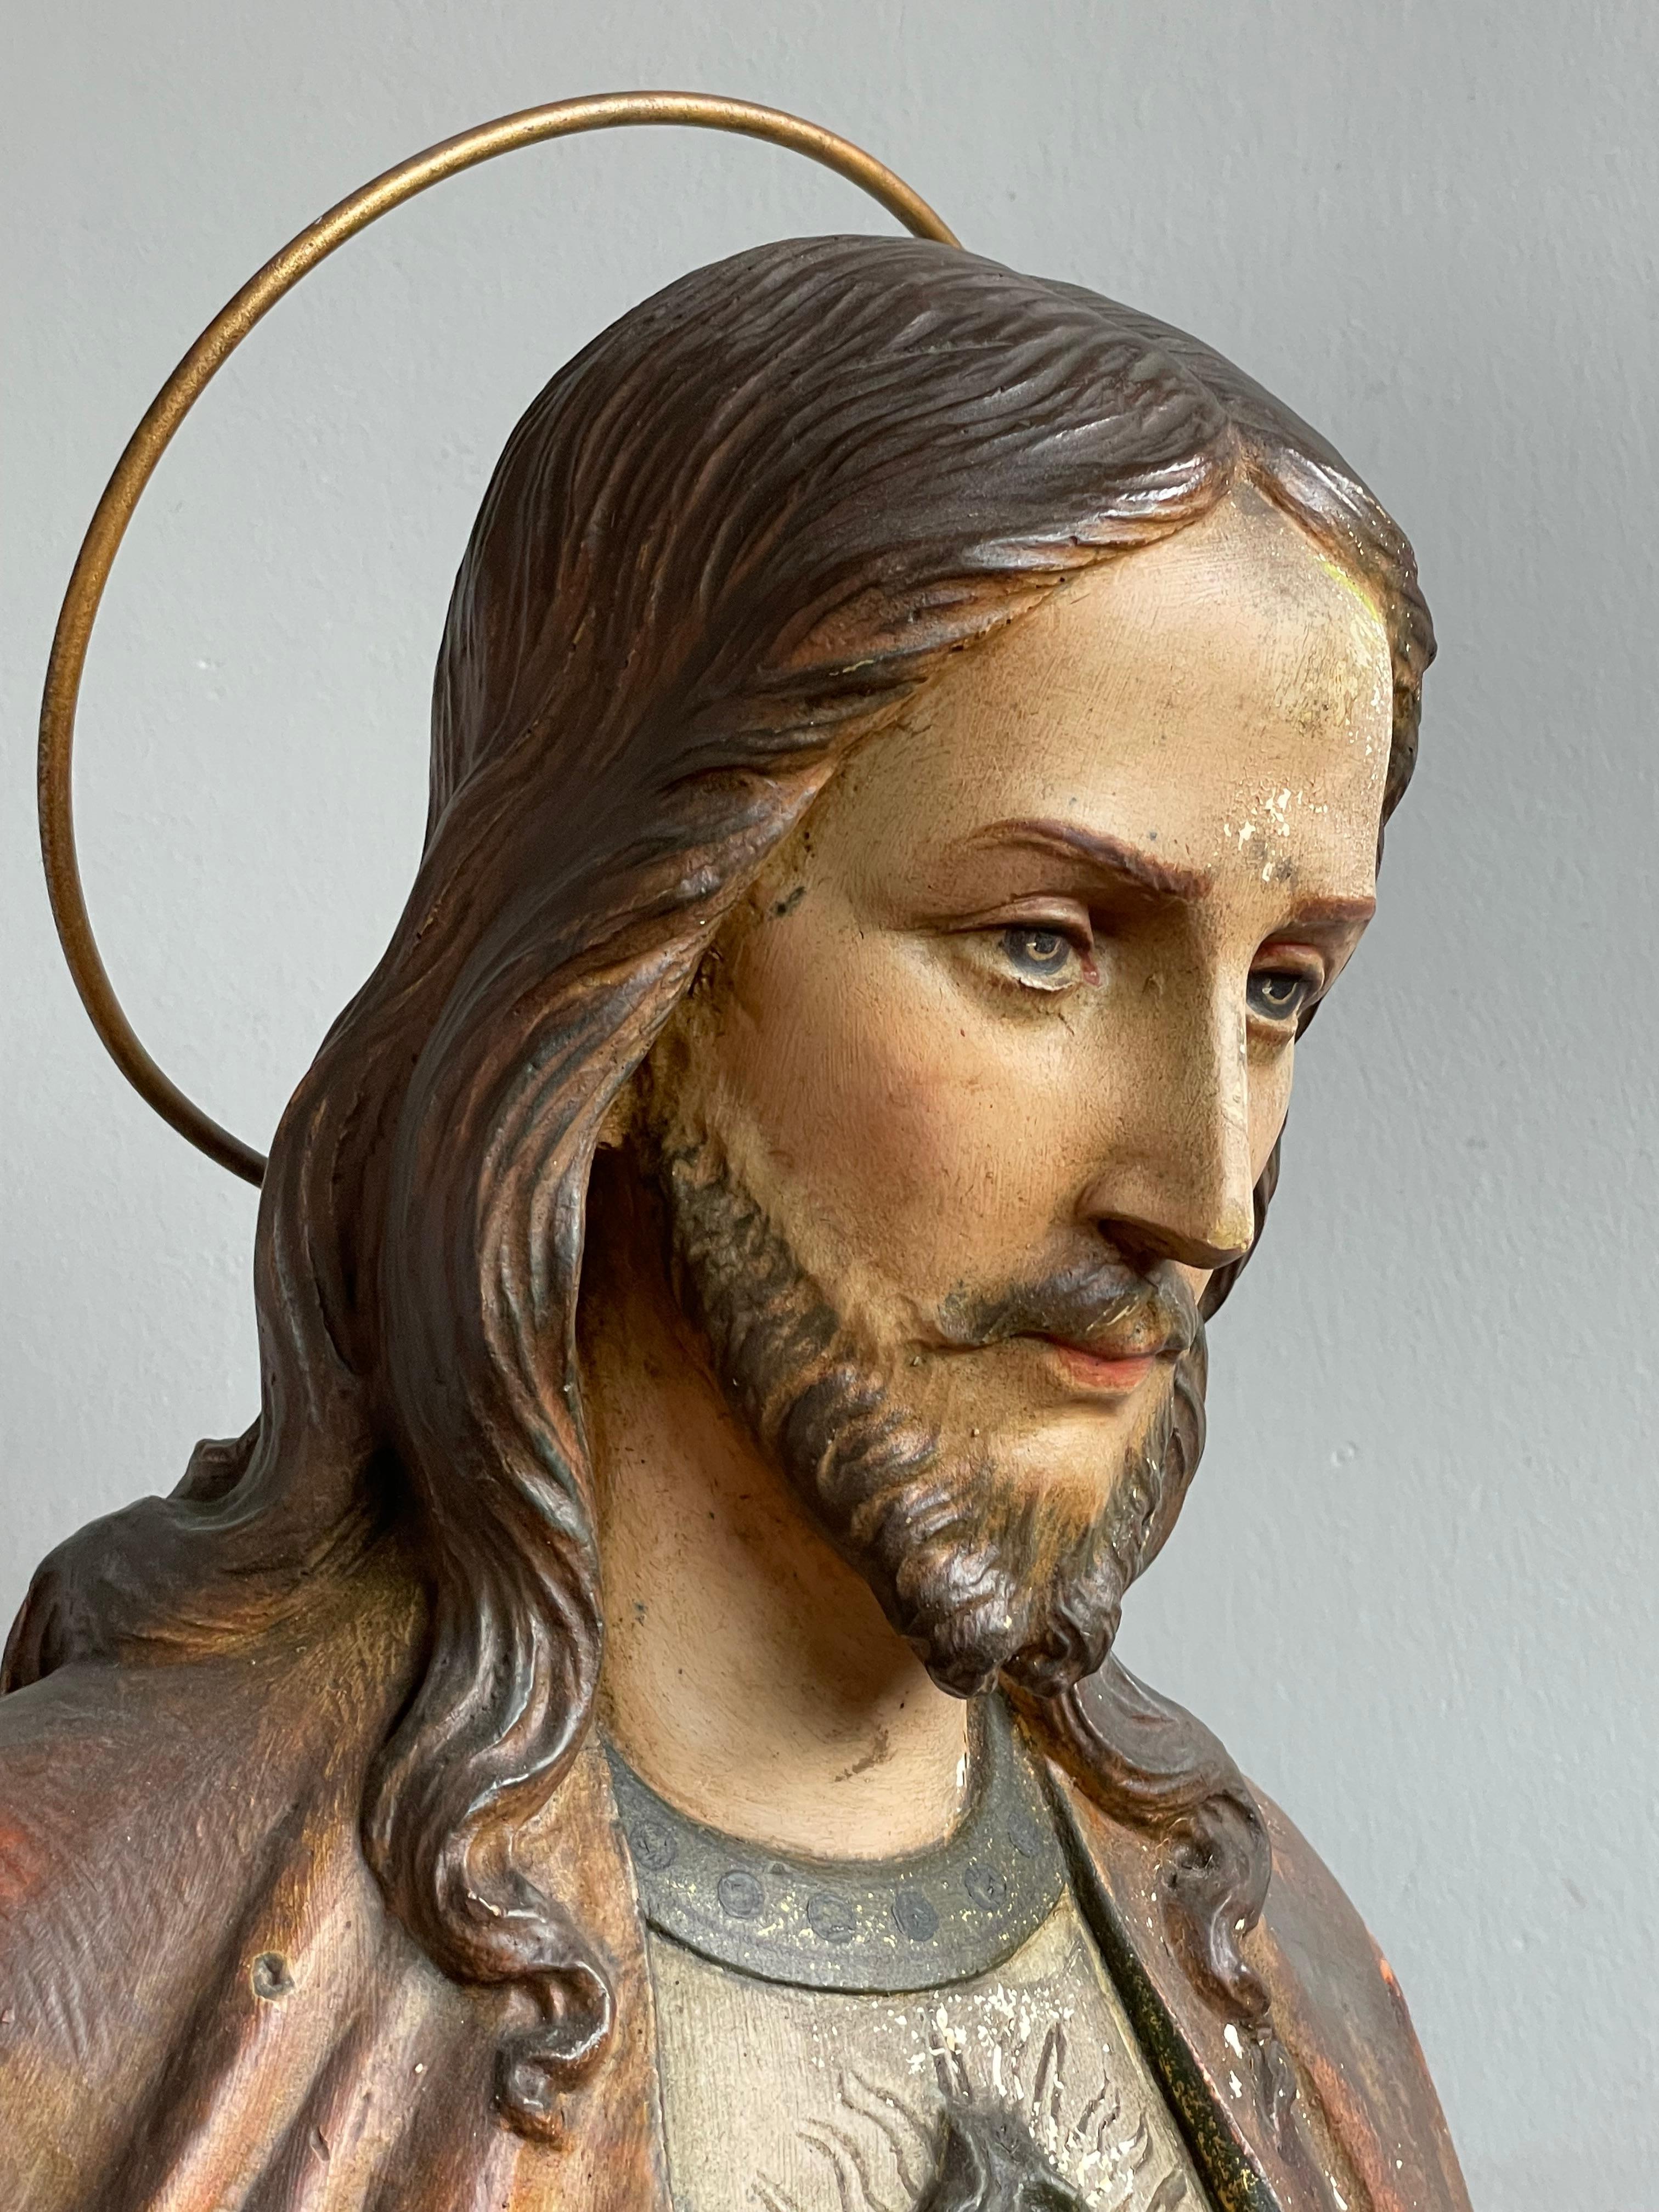 Antique & Rare Hand Painted Plaster, Church Sculpture or Statue of Jesus Christ For Sale 4